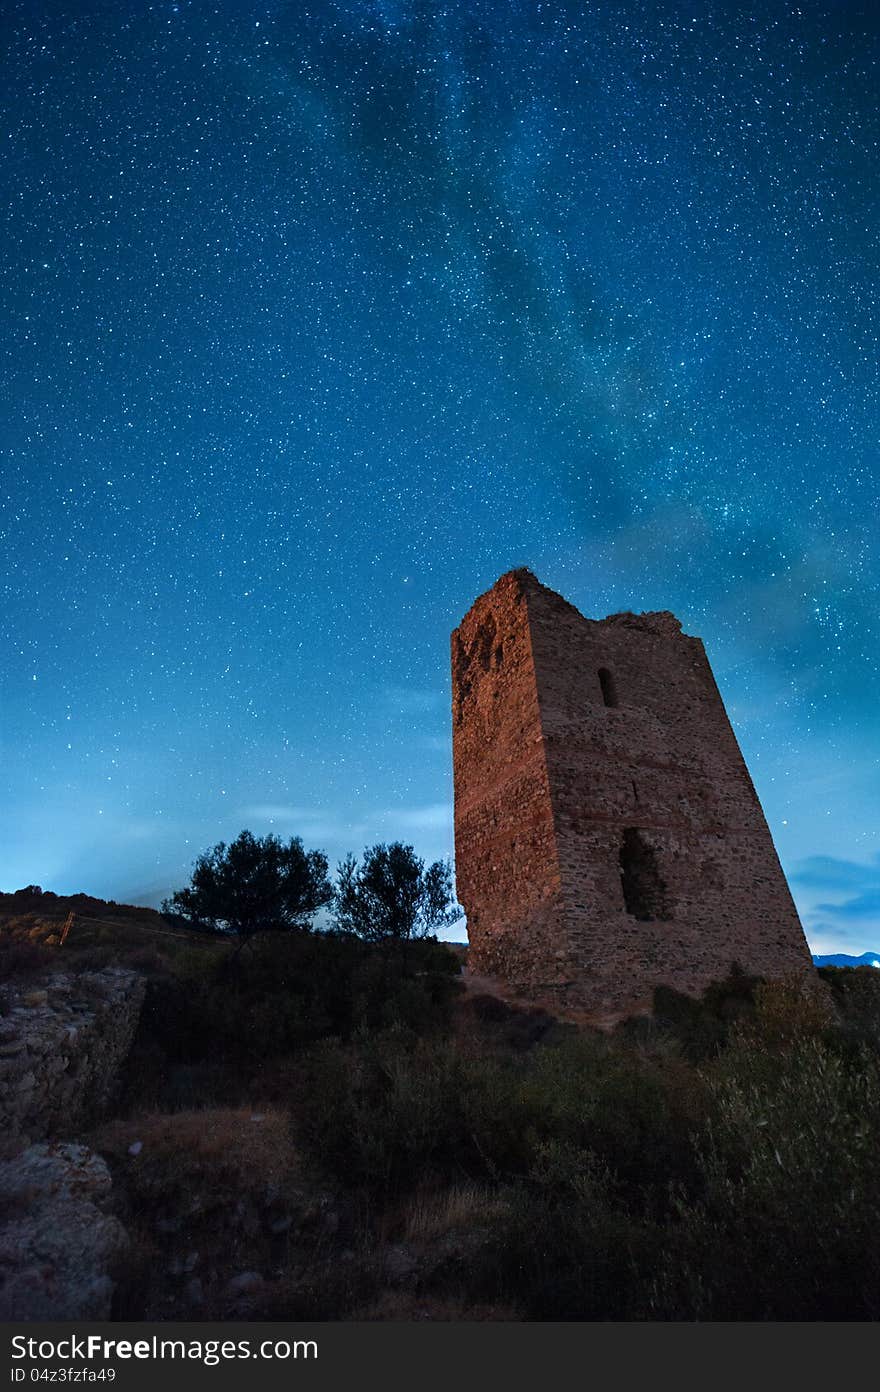 An amazing view of the milky way in front of the ruins of a medieval tower. An amazing view of the milky way in front of the ruins of a medieval tower